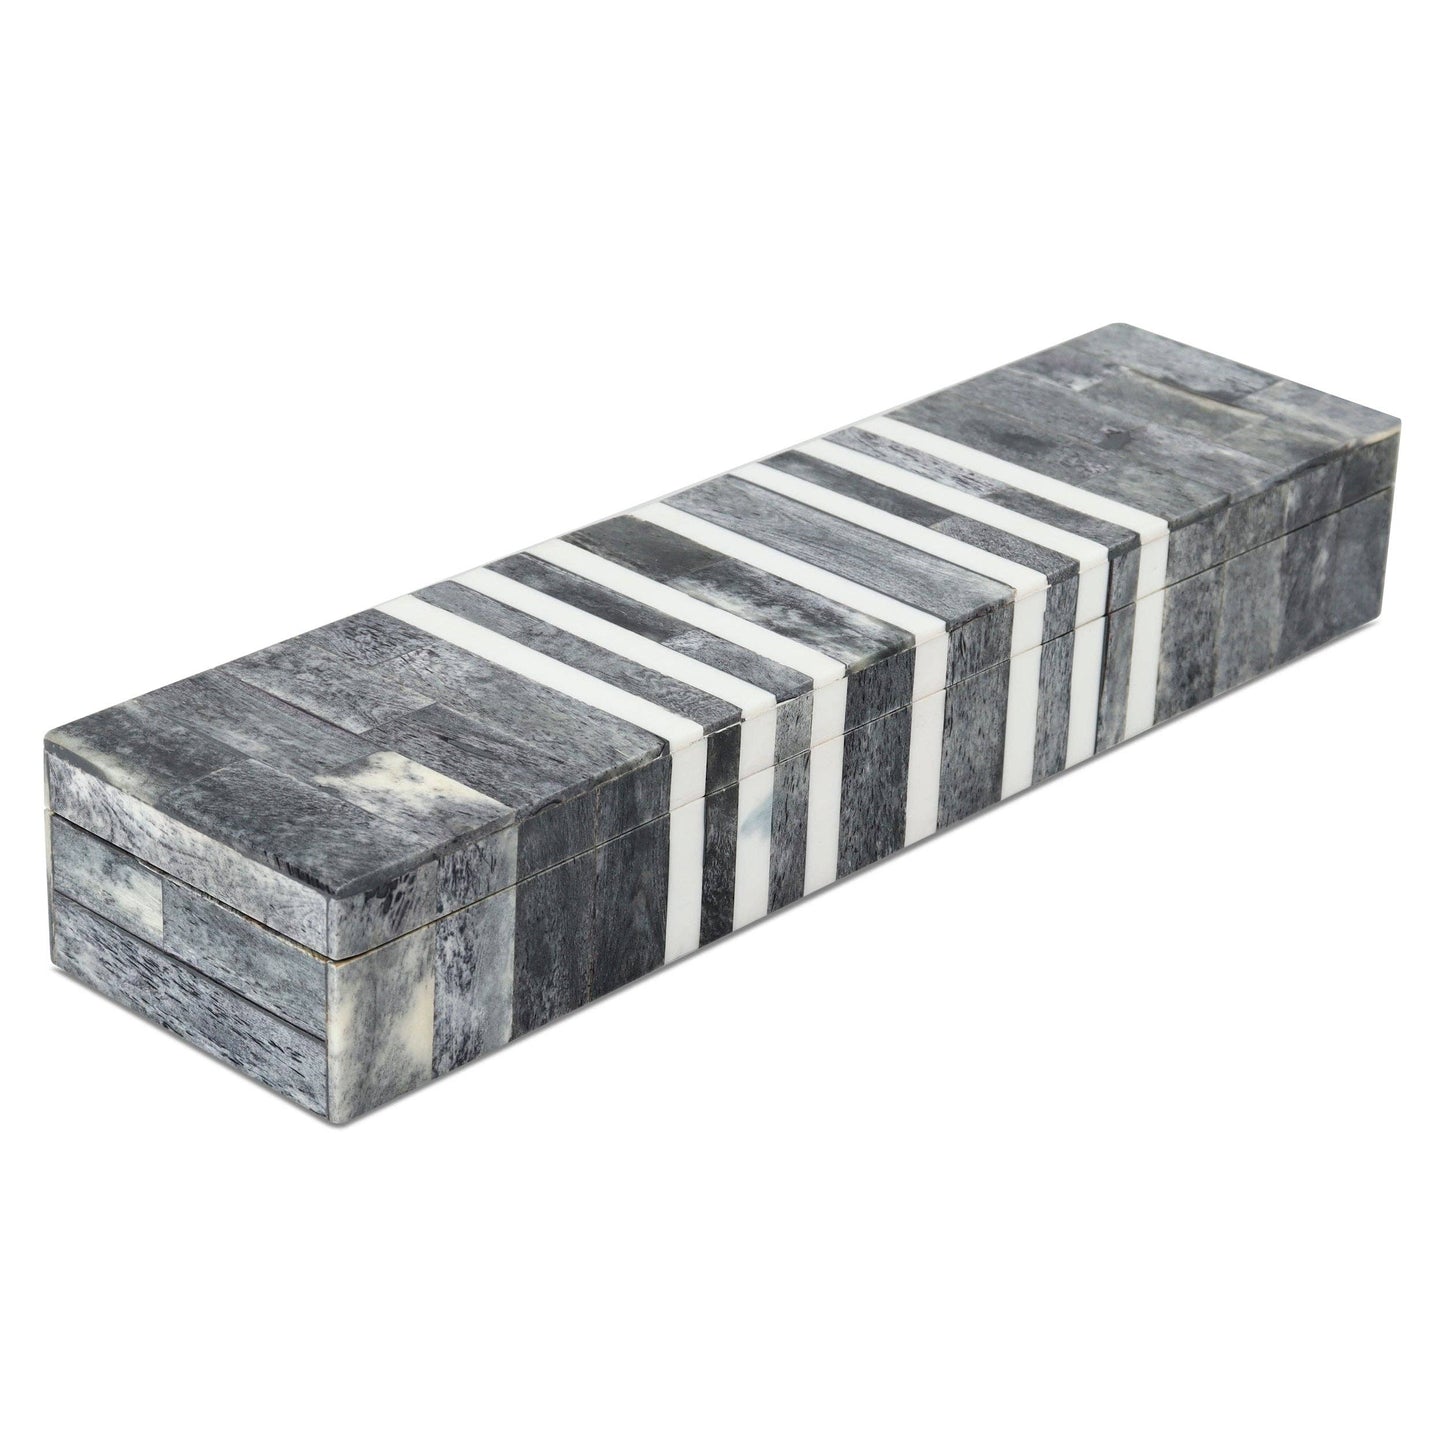 Decorative Boxes Patisserie Cafe Grey 10X2.5X1.5 Inch: 10X2.5X1.5 inch